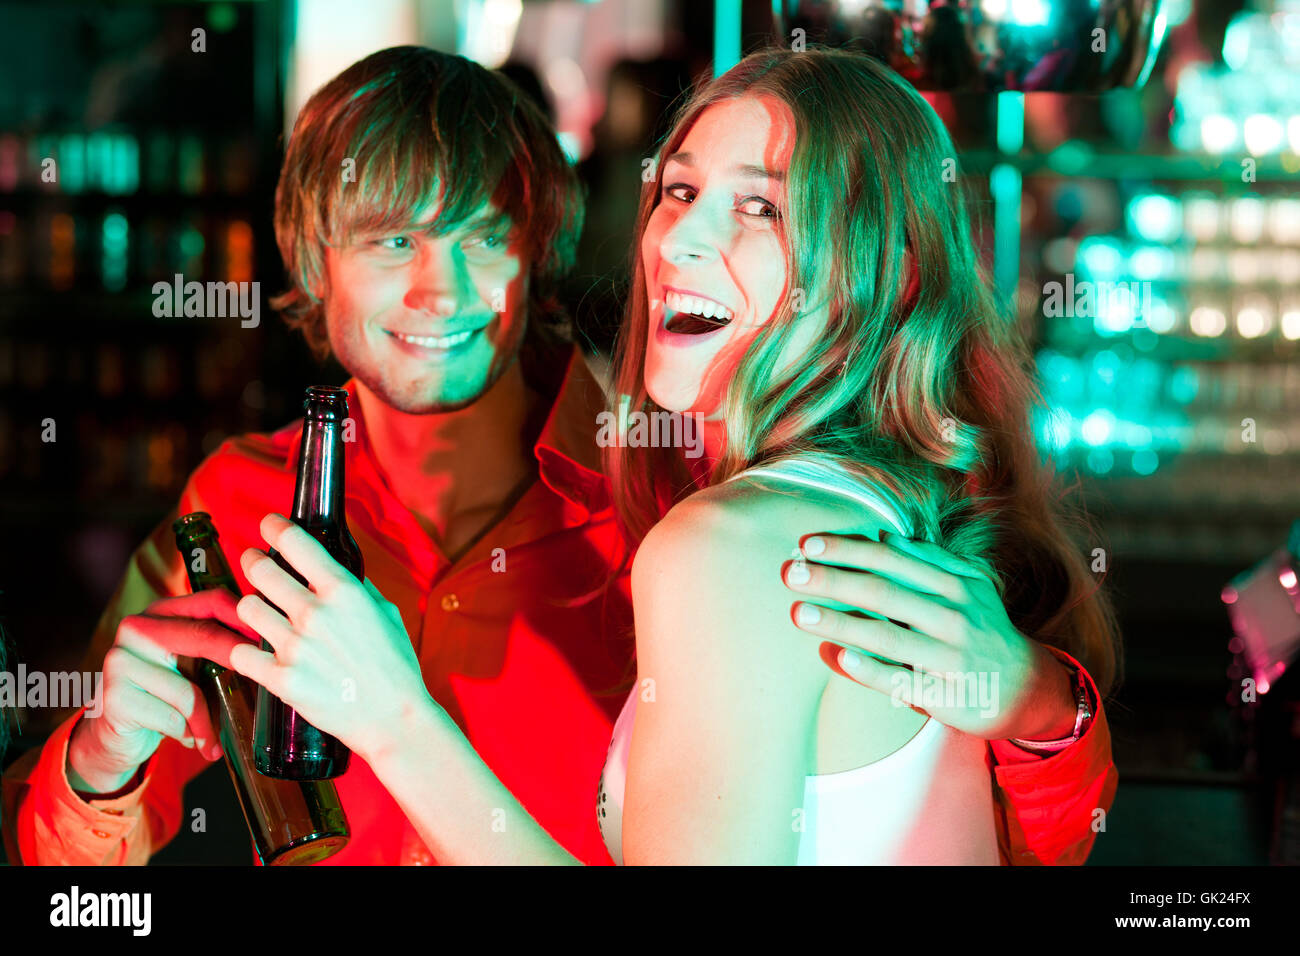 Couple Drinking In A Bar Or Club Stock Photo Alamy